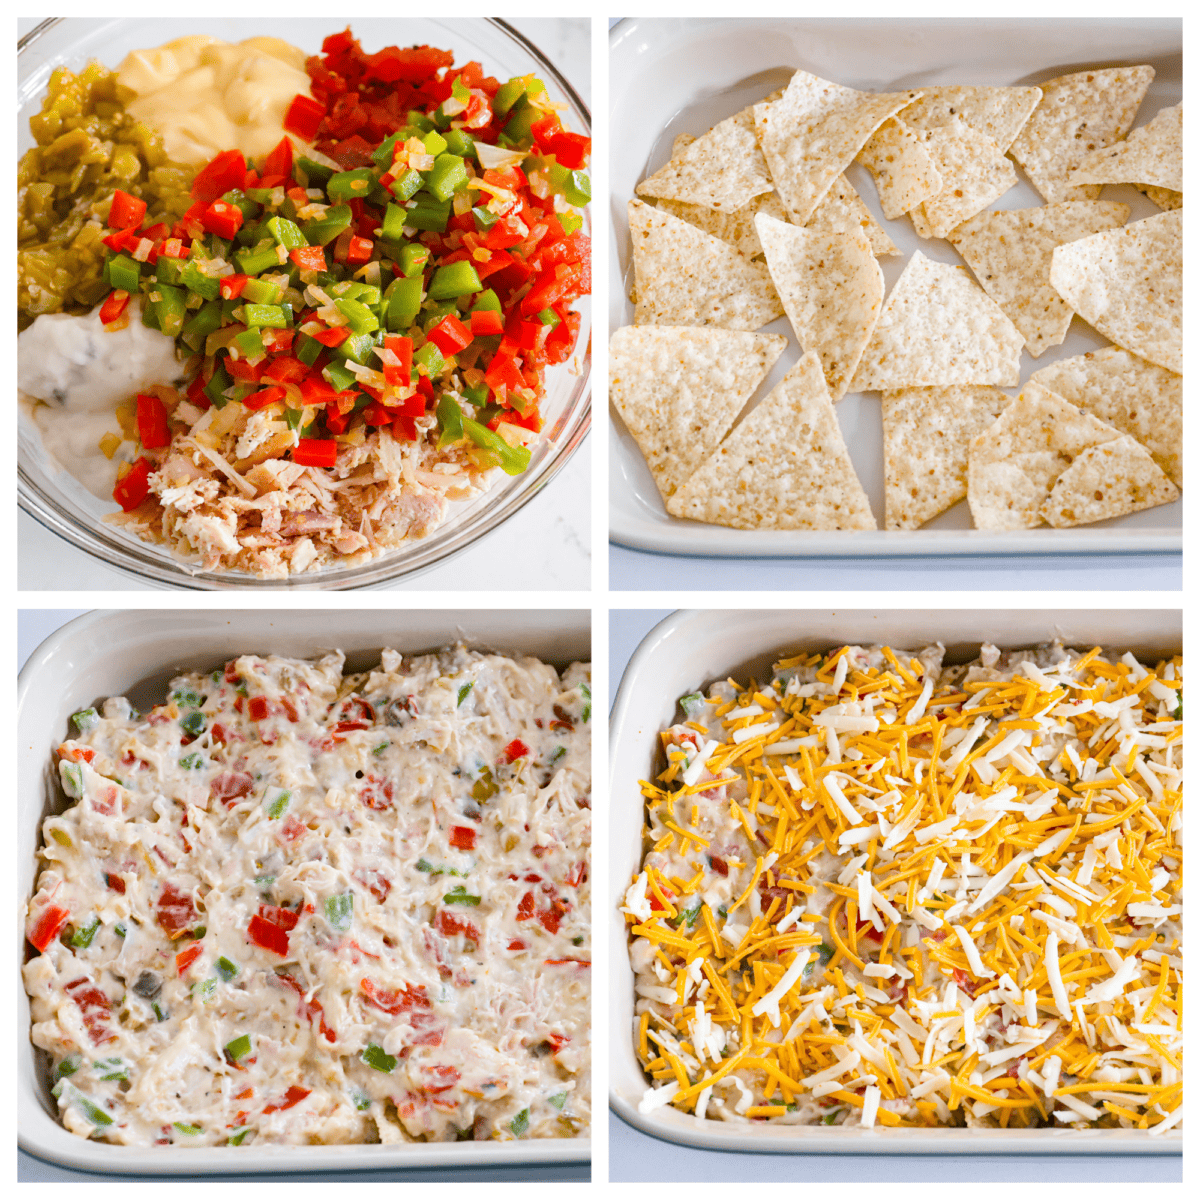 First photo of the creamy chicken mixture ingredients in a bowl. Second photo of the chips layered in a baking dish. Third photo of the creamy chicken mixture layered on top of the chips. Fourth photo of cheese sprinkled on top of the casserole.